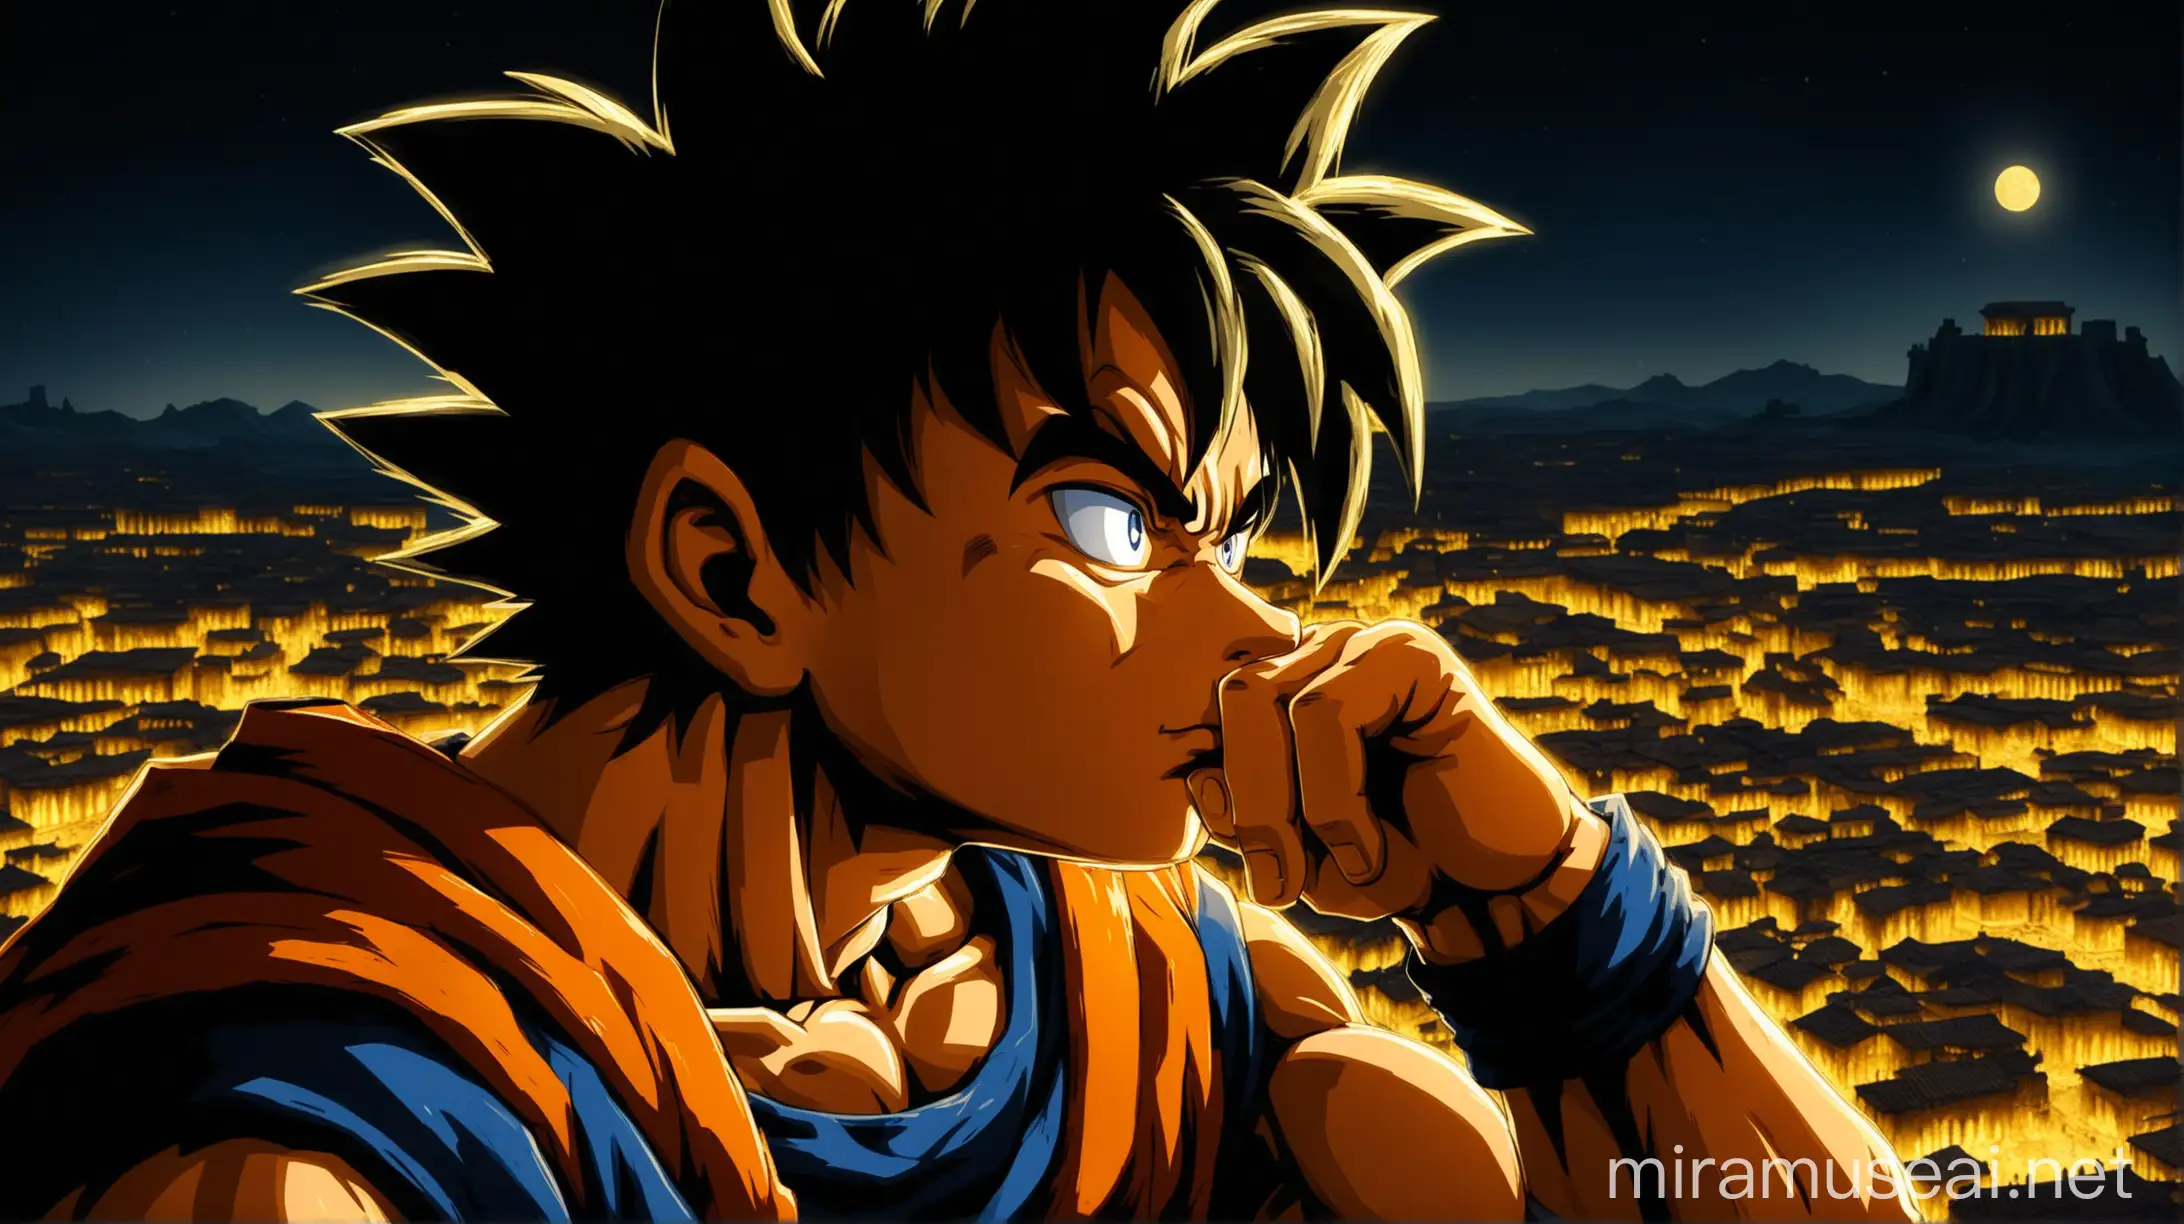 goku with ultra detailed face with a lot of shadows with his hand on his chin thinking, night roman empire in the background with yellowy lights